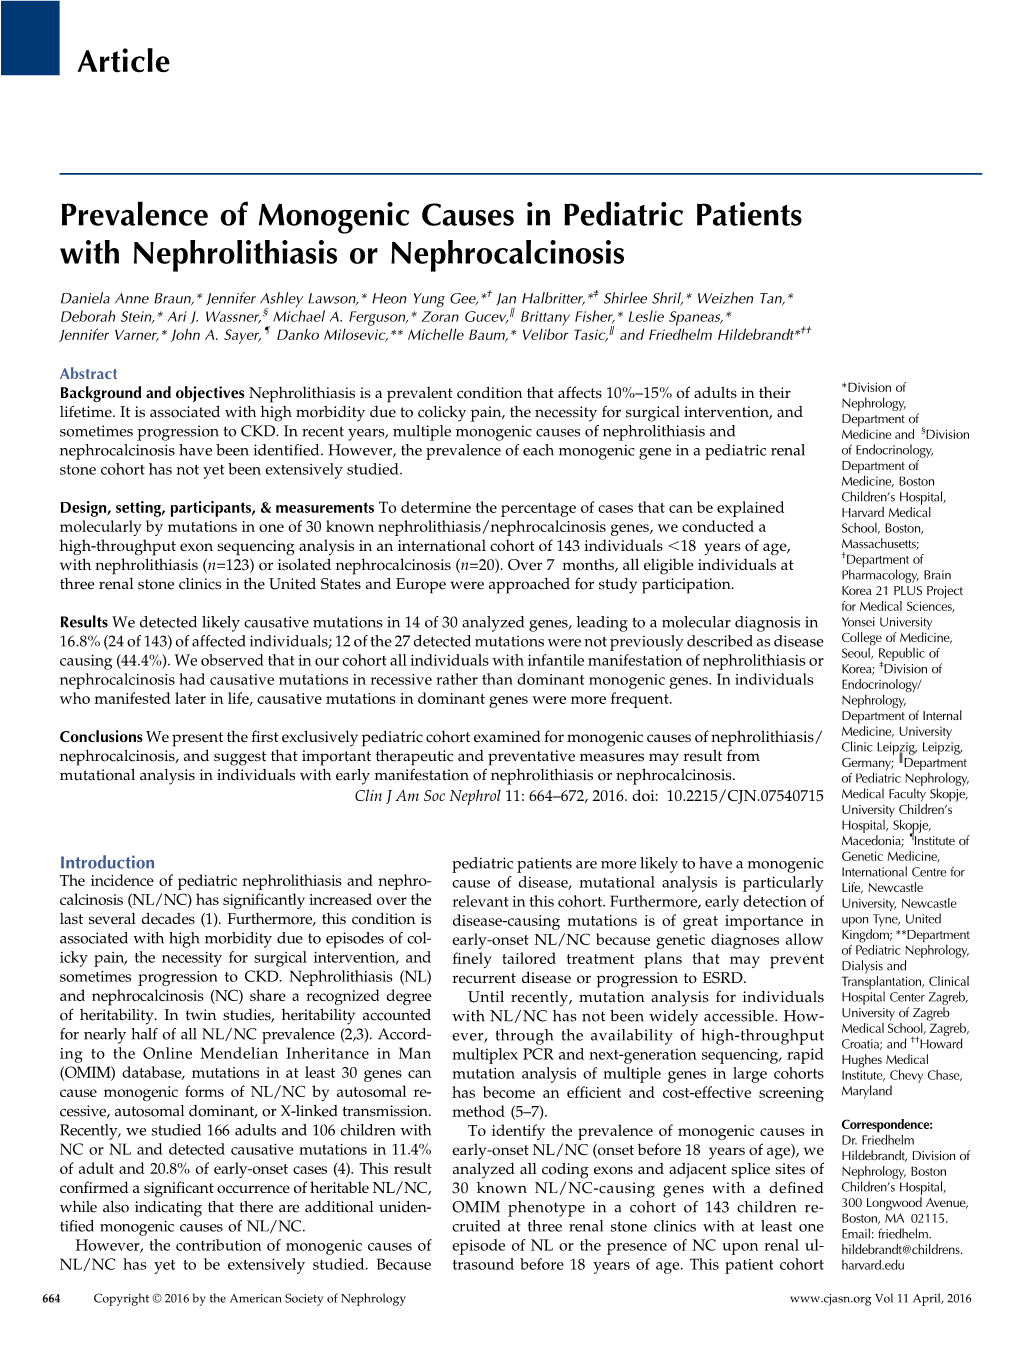 Prevalence of Monogenic Causes in Pediatric Patients with Nephrolithiasis Or Nephrocalcinosis